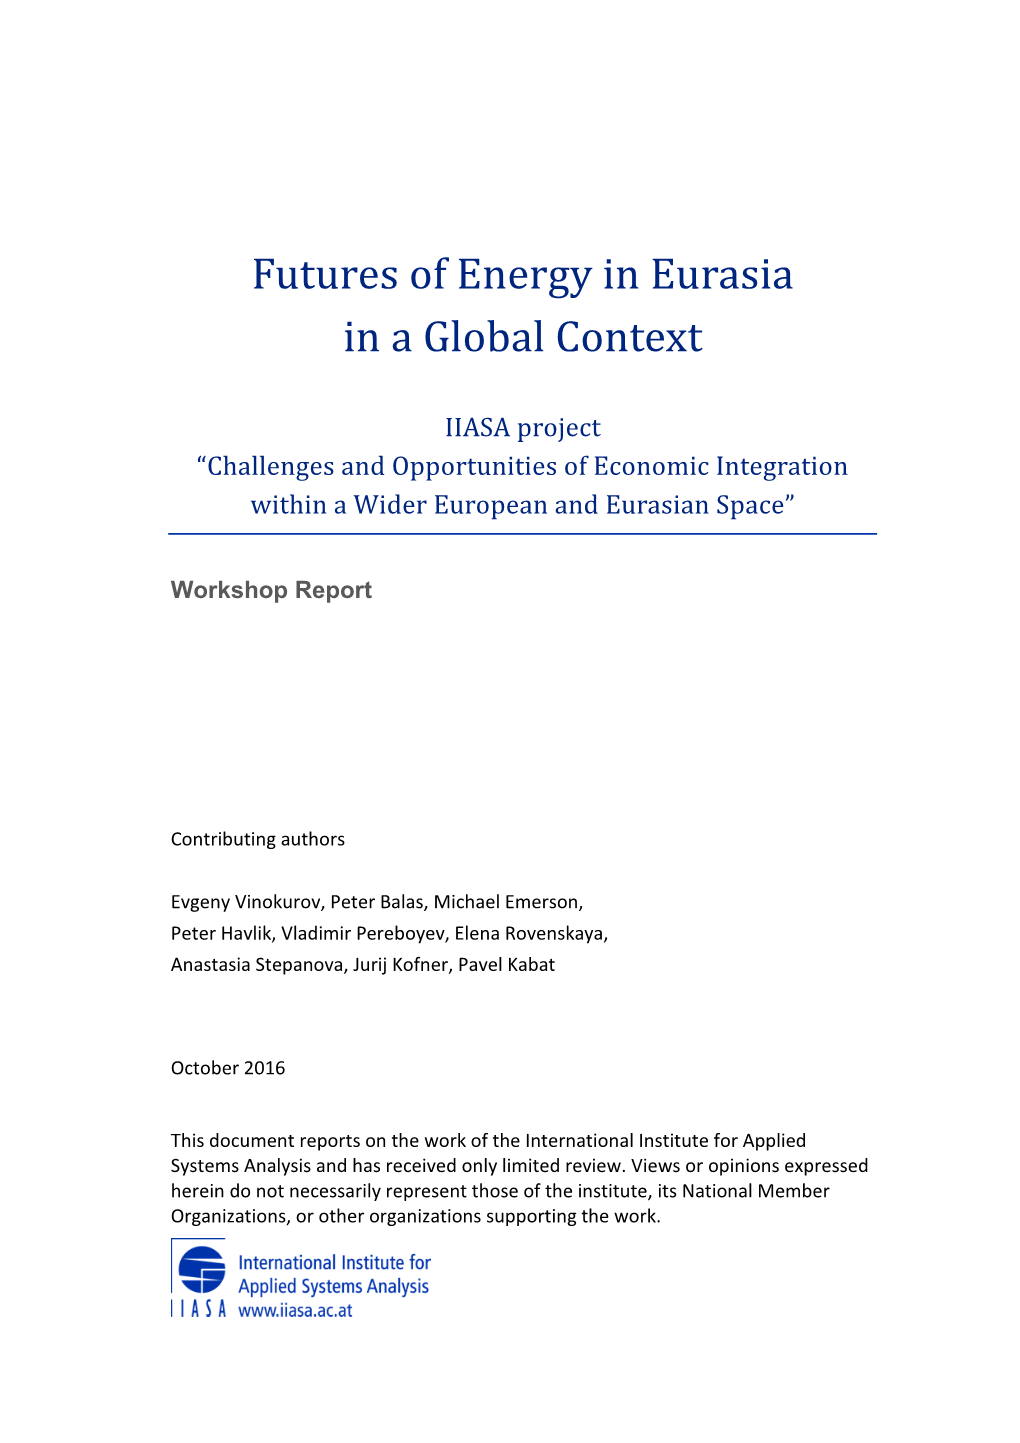 Futures of Energy in Eurasia in a Global Context